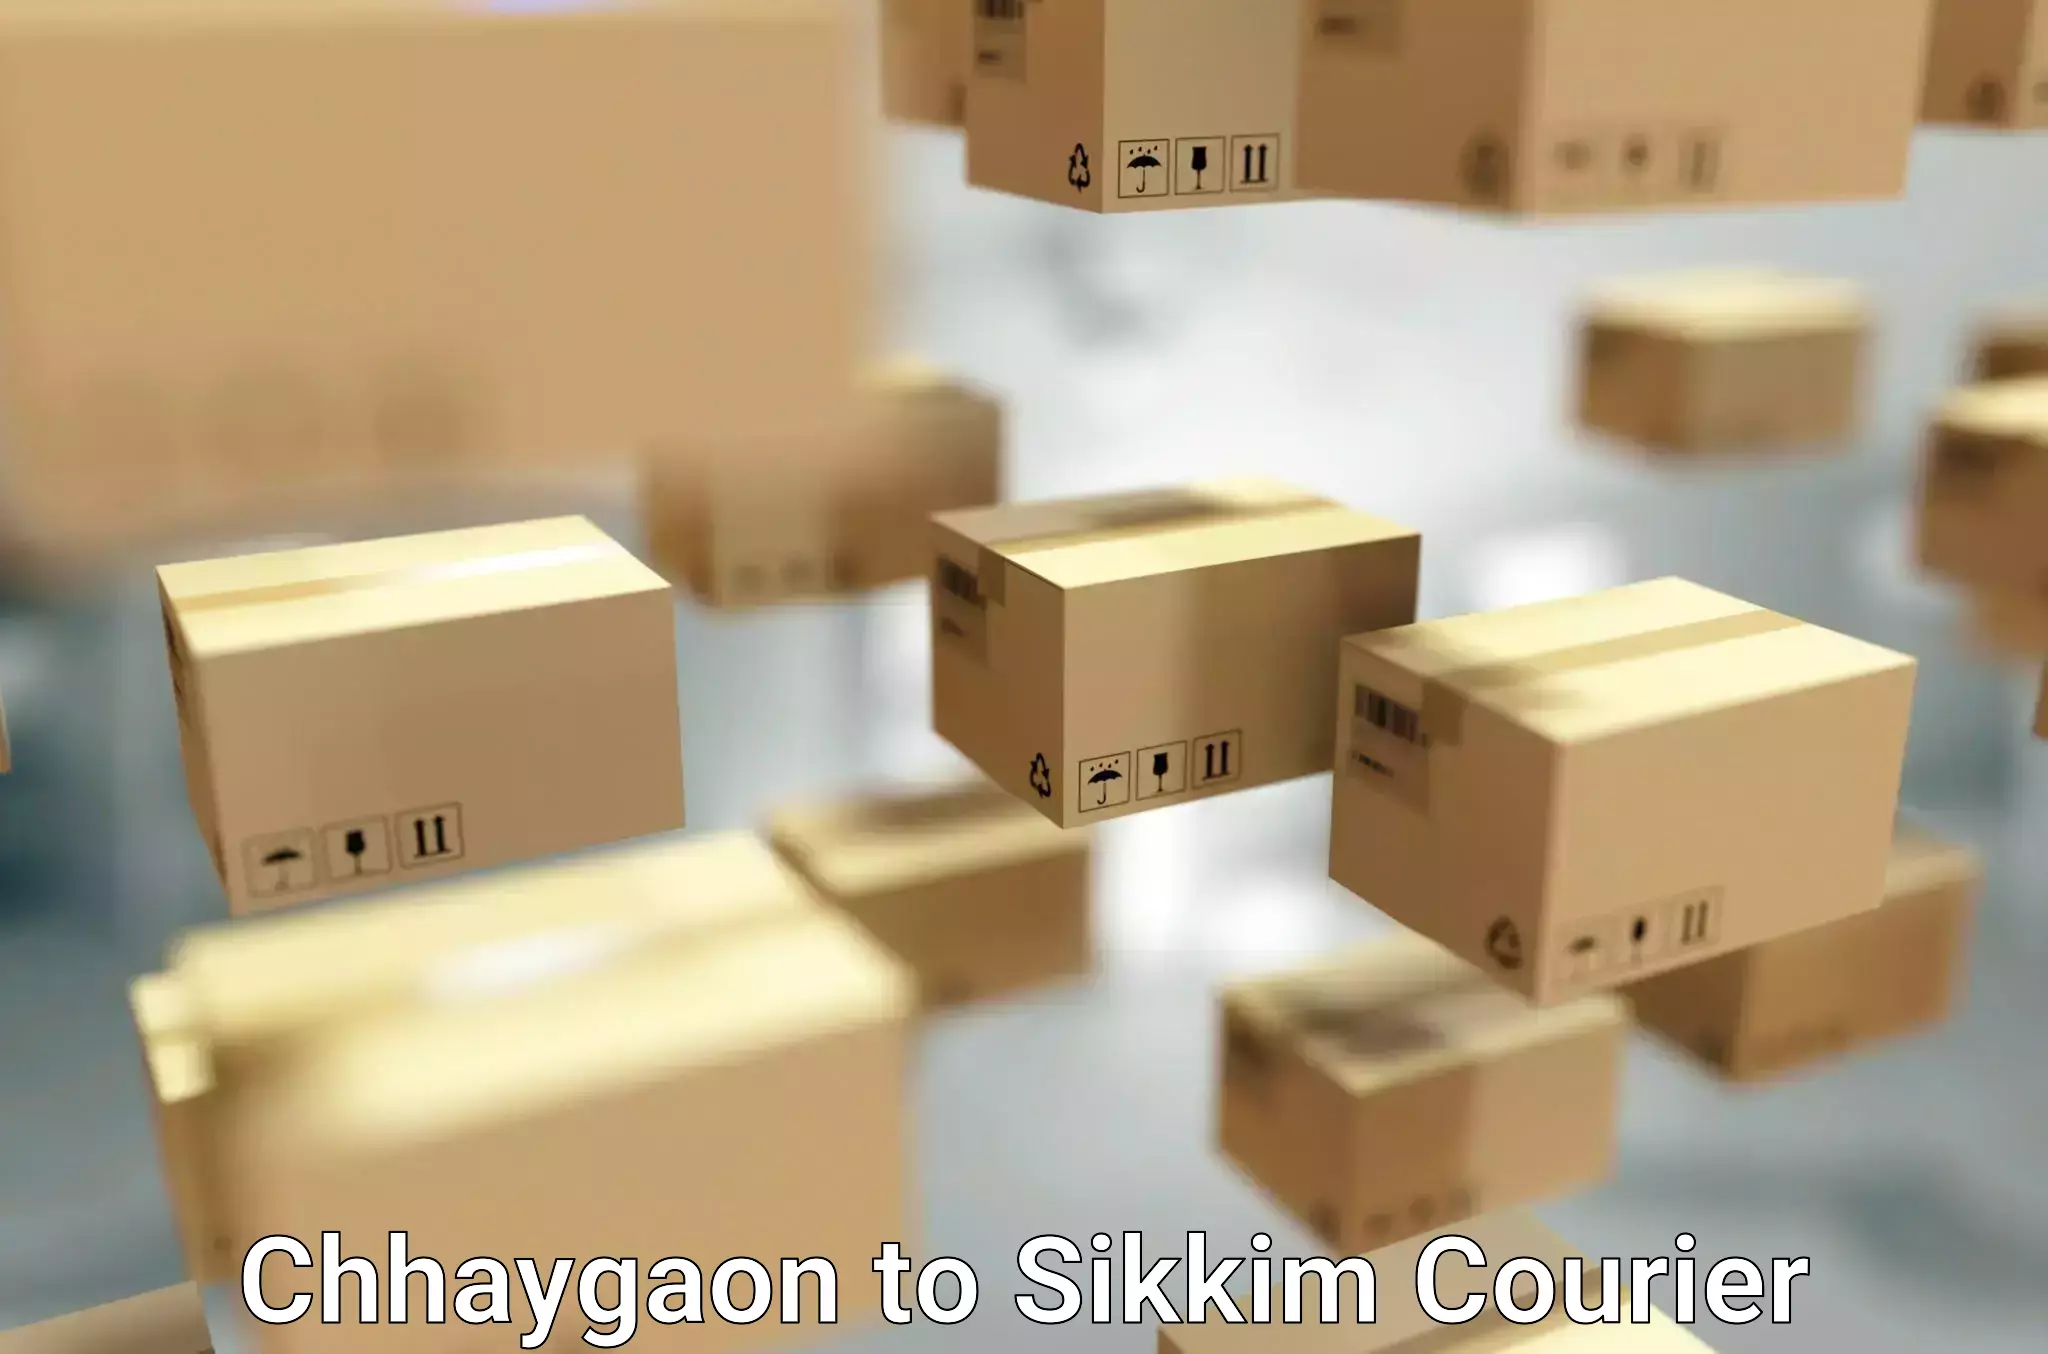 Home relocation experts Chhaygaon to Sikkim